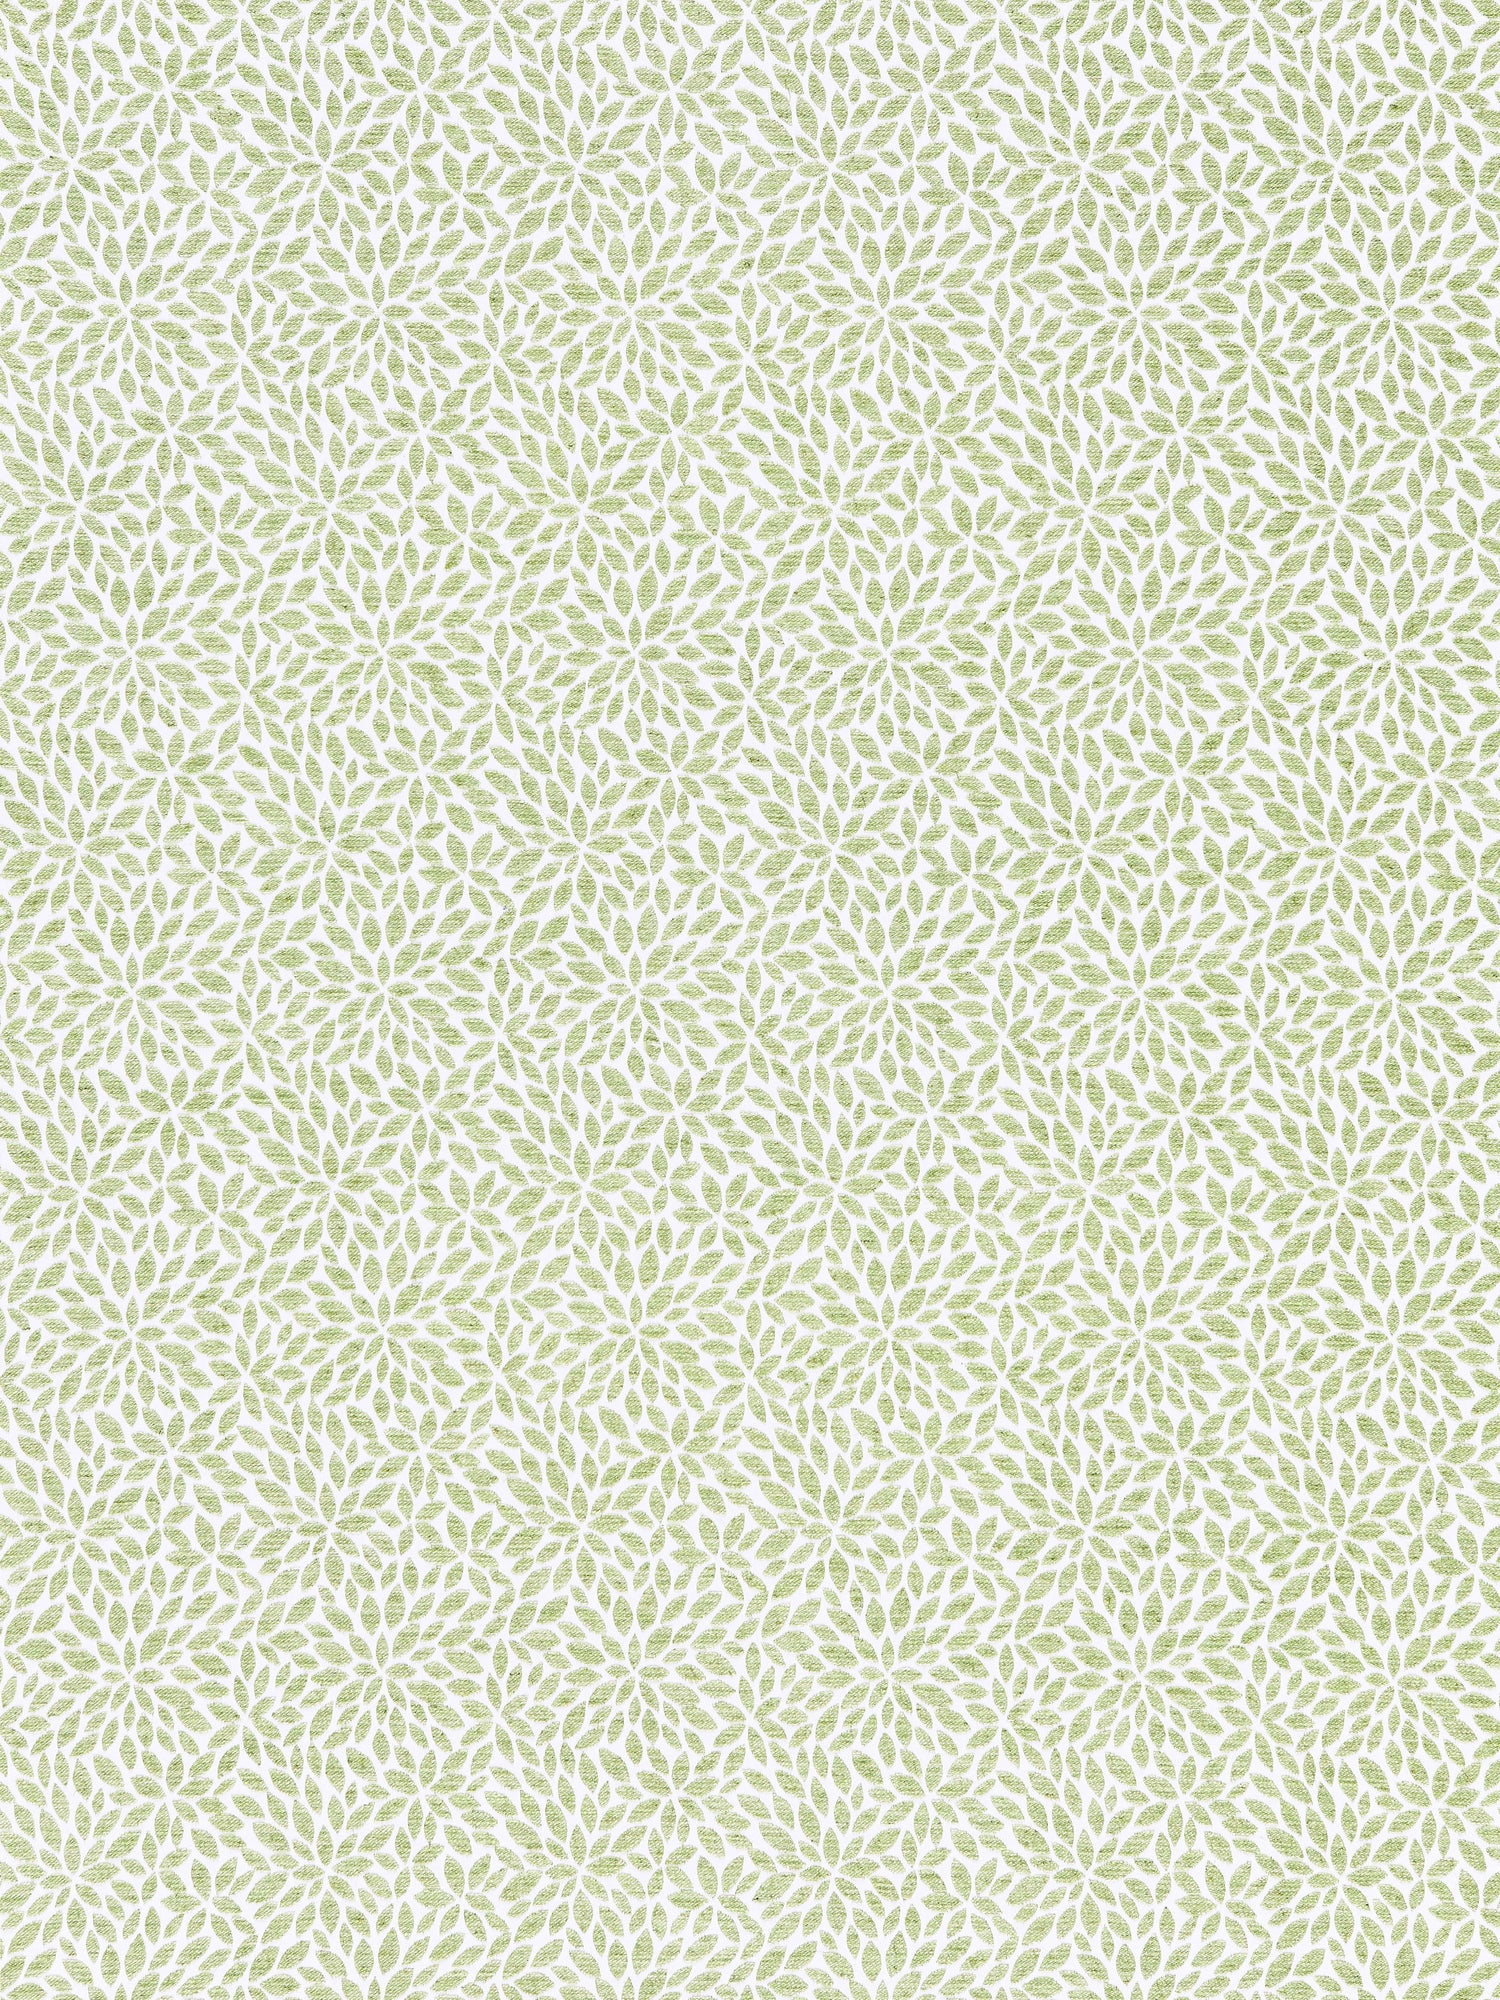 Risa Weave fabric in fern color - pattern number SC 000227239 - by Scalamandre in the Scalamandre Fabrics Book 1 collection